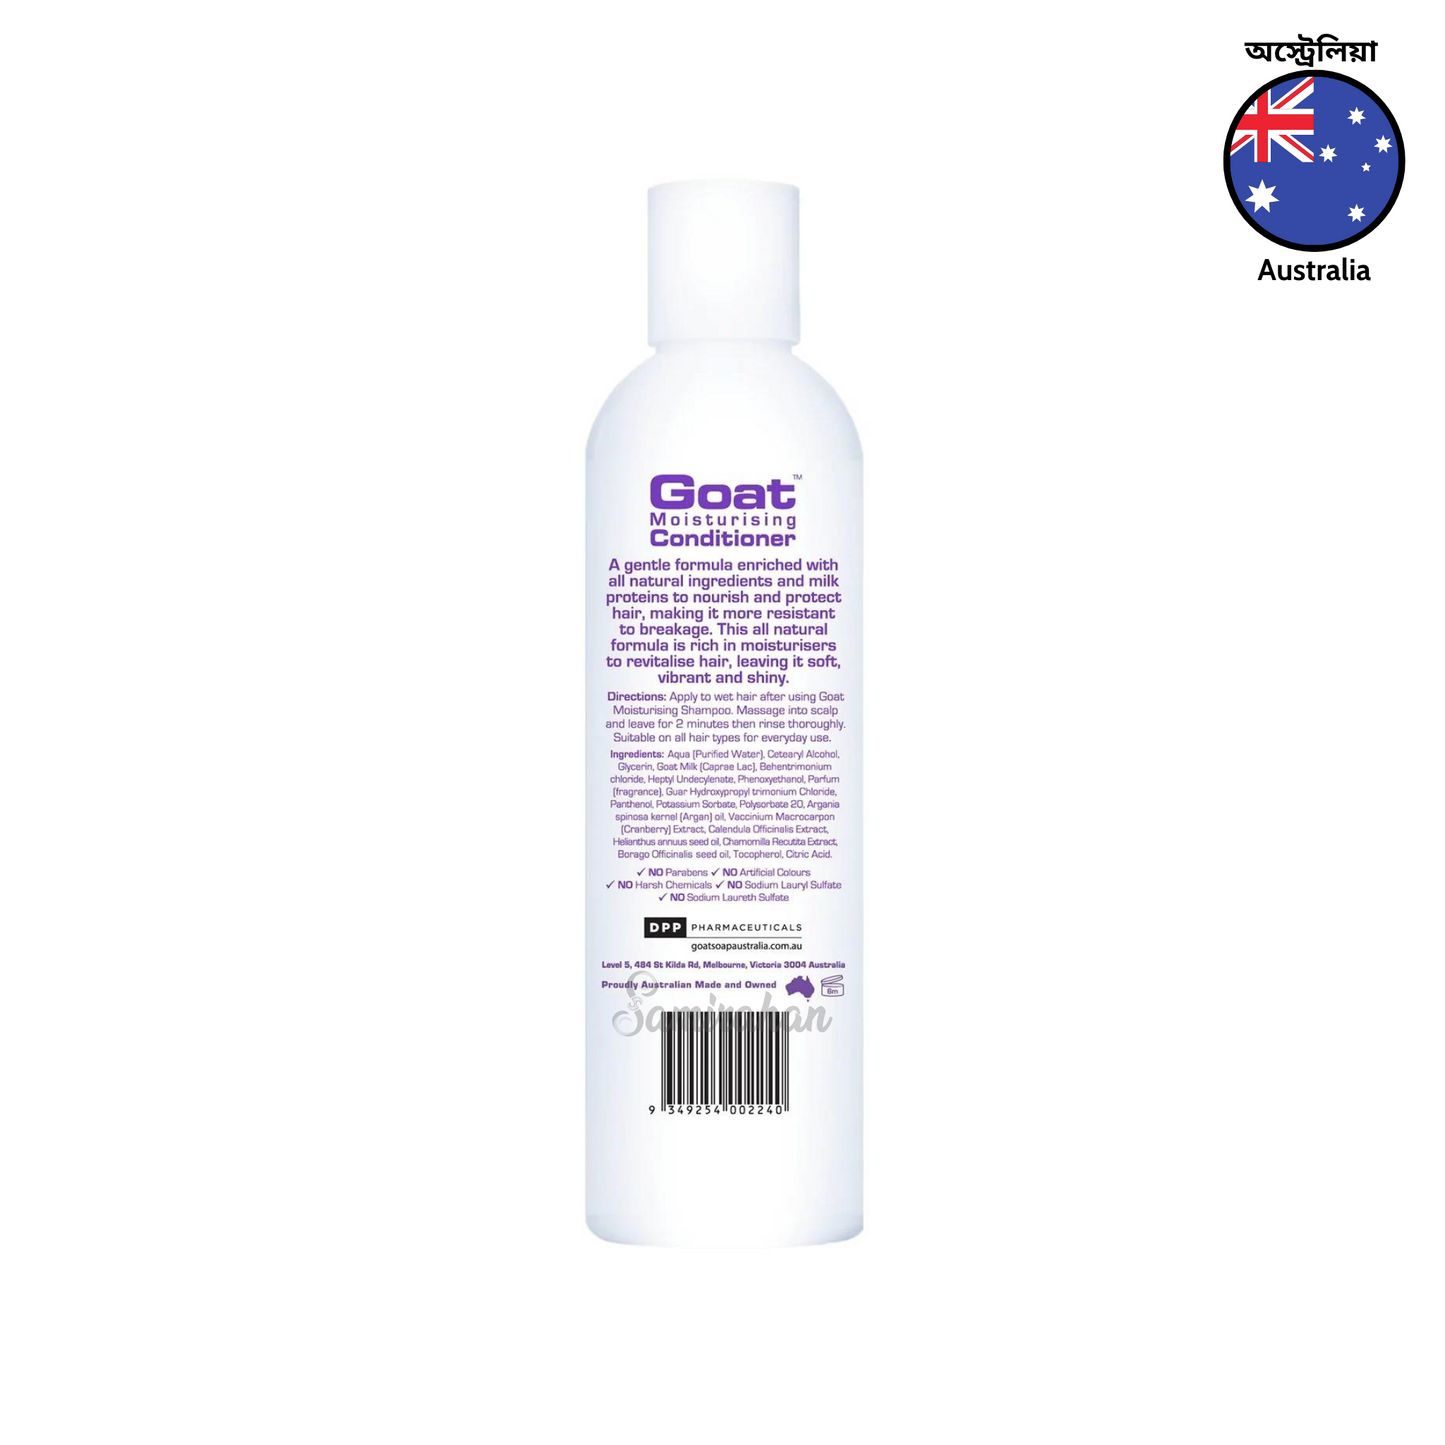 Goat Milk Moisturising Conditioner With Argan Oil revitalizes your hair & scalp leaving it soft, silky & shiny without harsh chemicals. Made with pure Australian Goat Milk. Best imported foreign Australian Aussie genuine authentic premium quality real skincare beauty skin care price in Dhaka Chittagong Bangladesh.